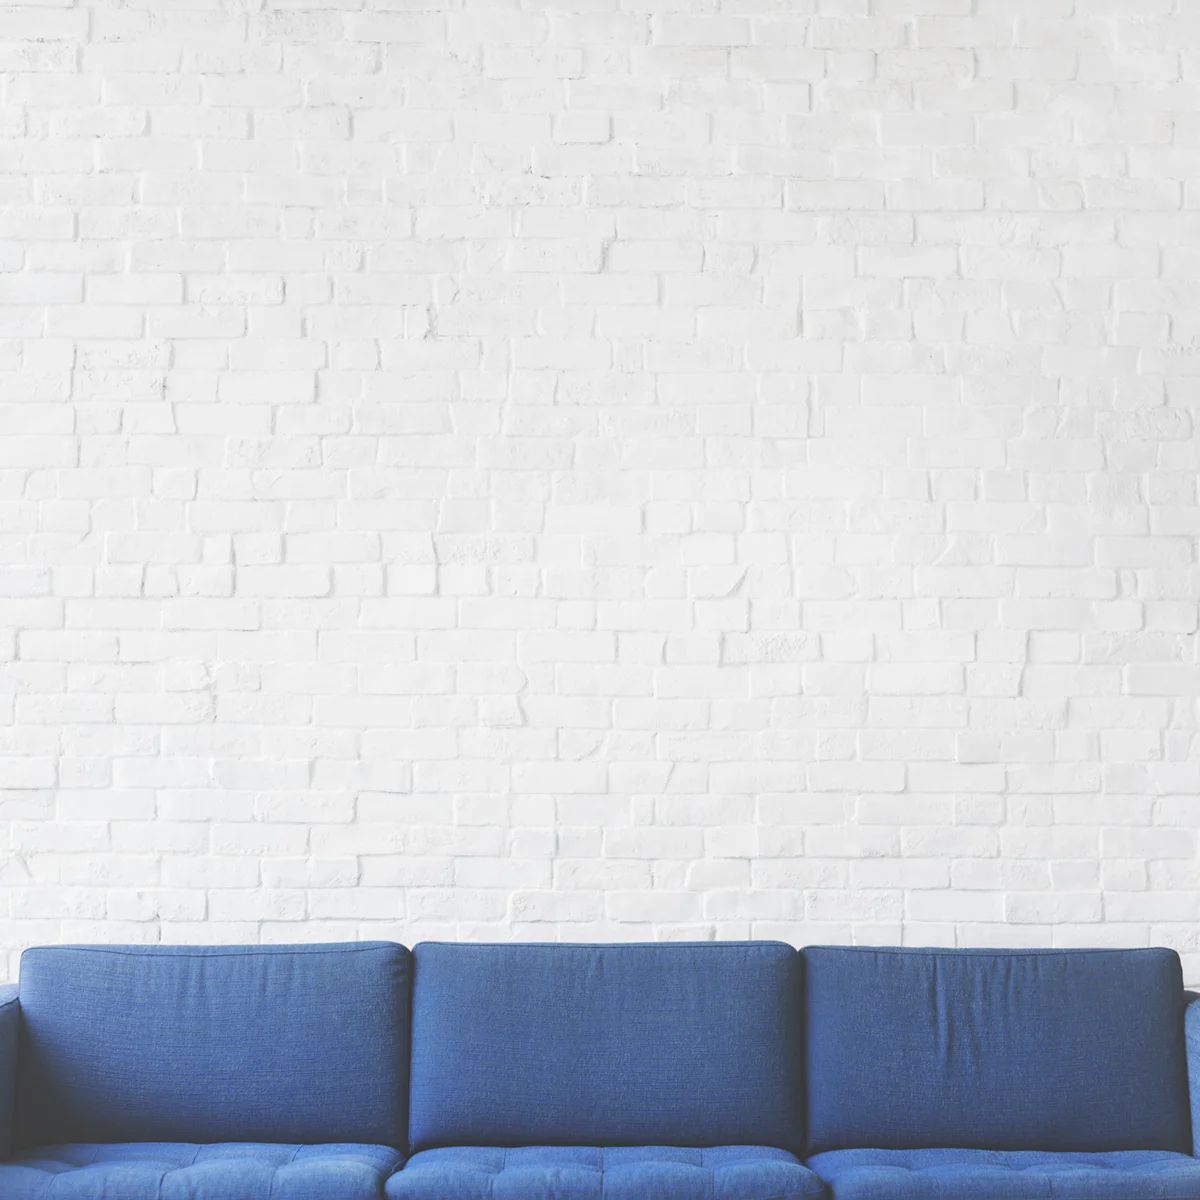 Living room wall with a comfy couch and brick wall